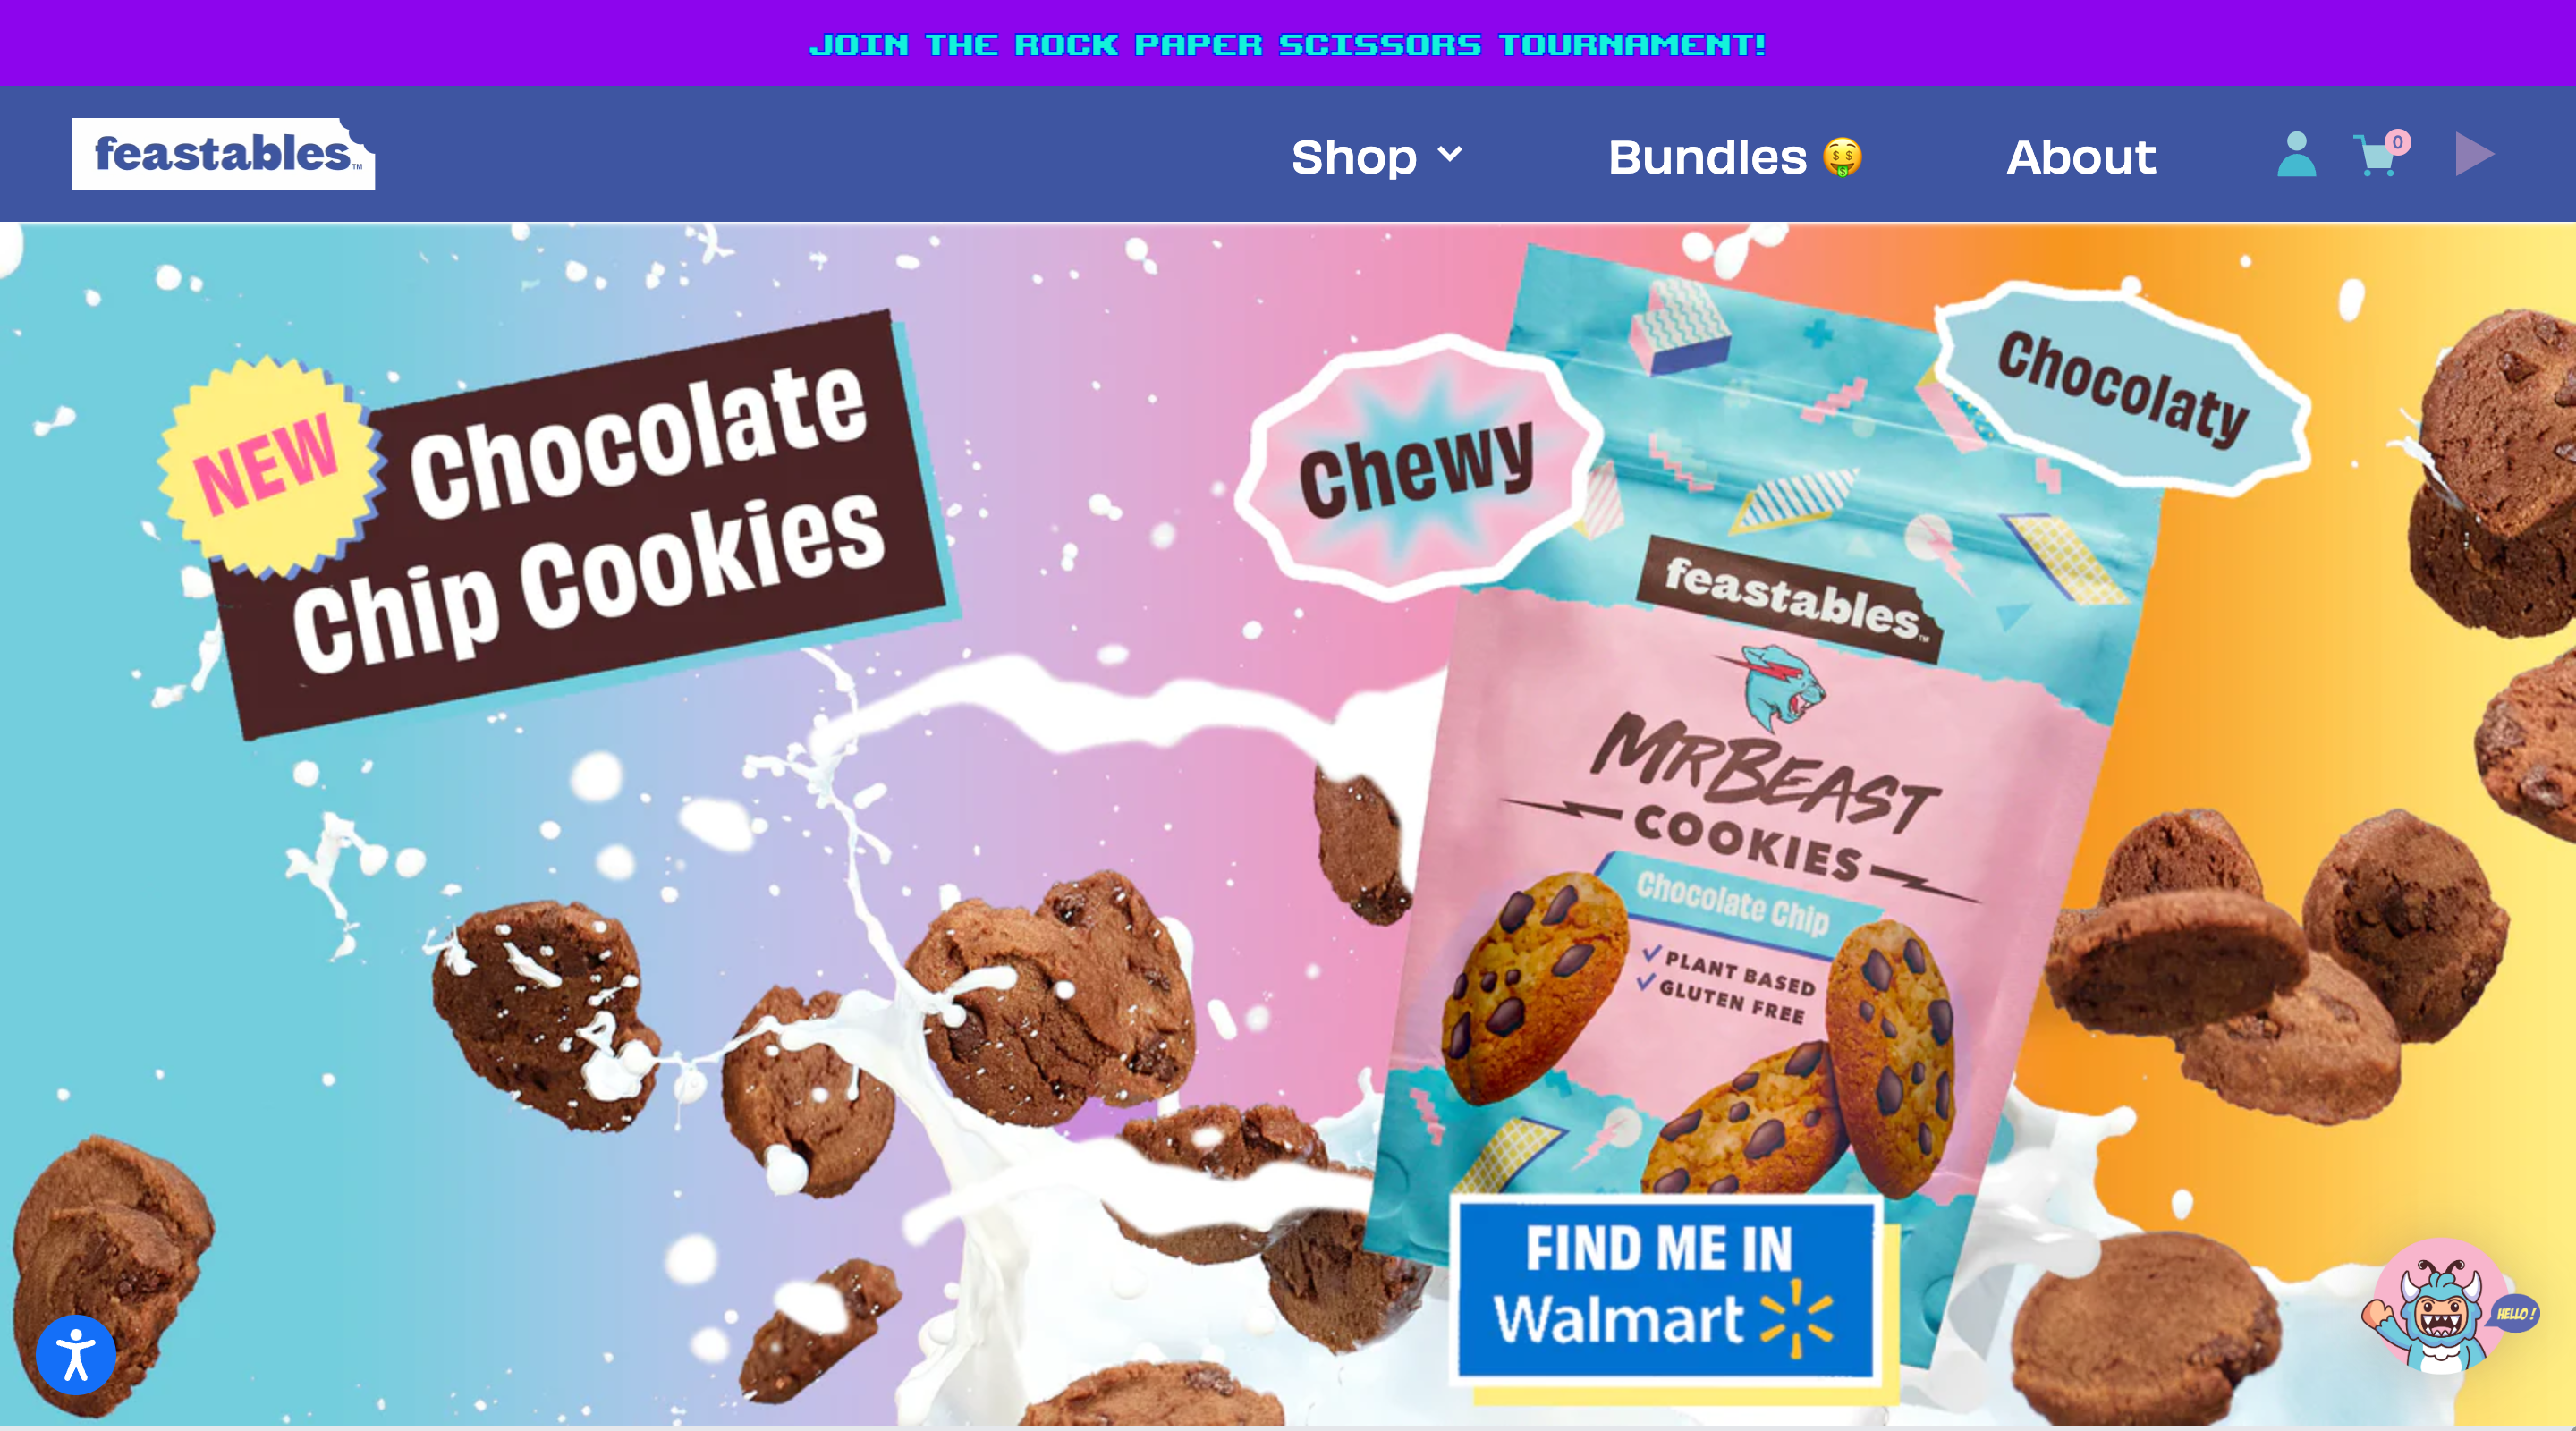 Screenshot of the Feastables home page. A header contains the Feastables logo and main site navigation. The hero section shows the packaging for 'Mr Beast Chocolate Chip Cookies' surrounded by an explosion of cookies and milk.